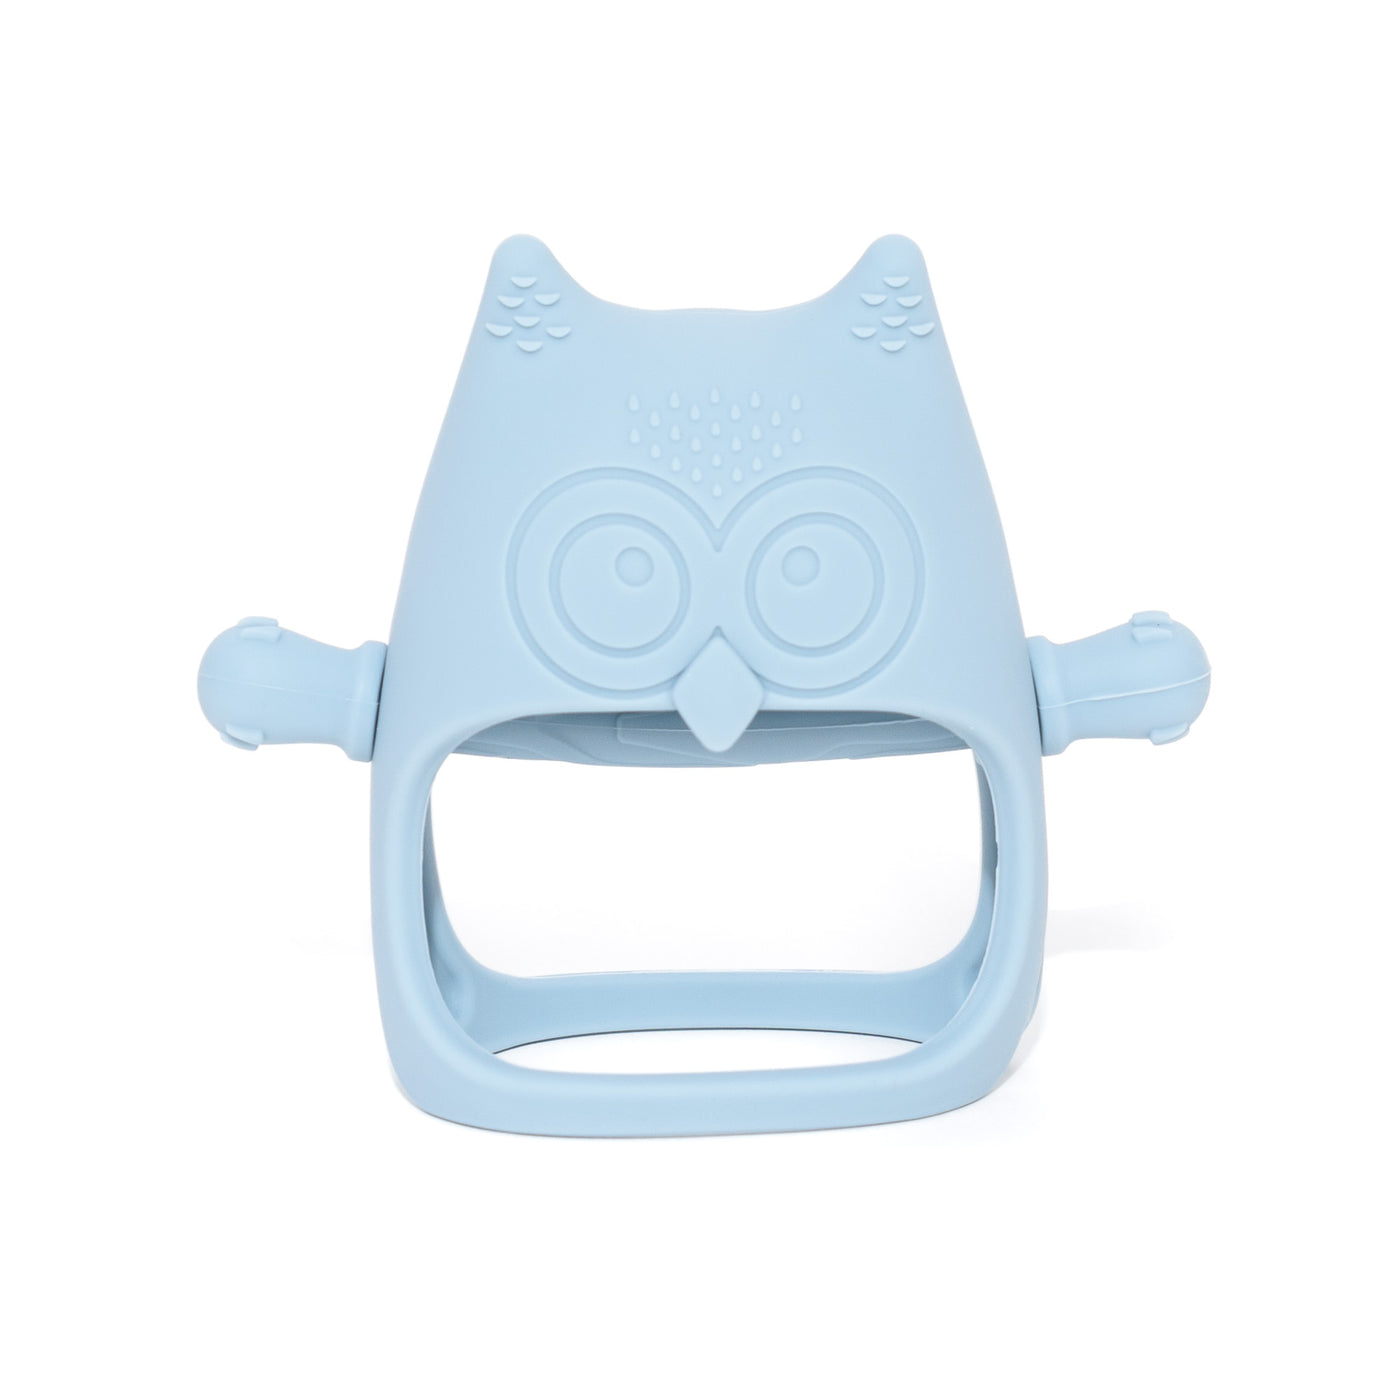 Silicone Mitten Teether - Owl and Fox